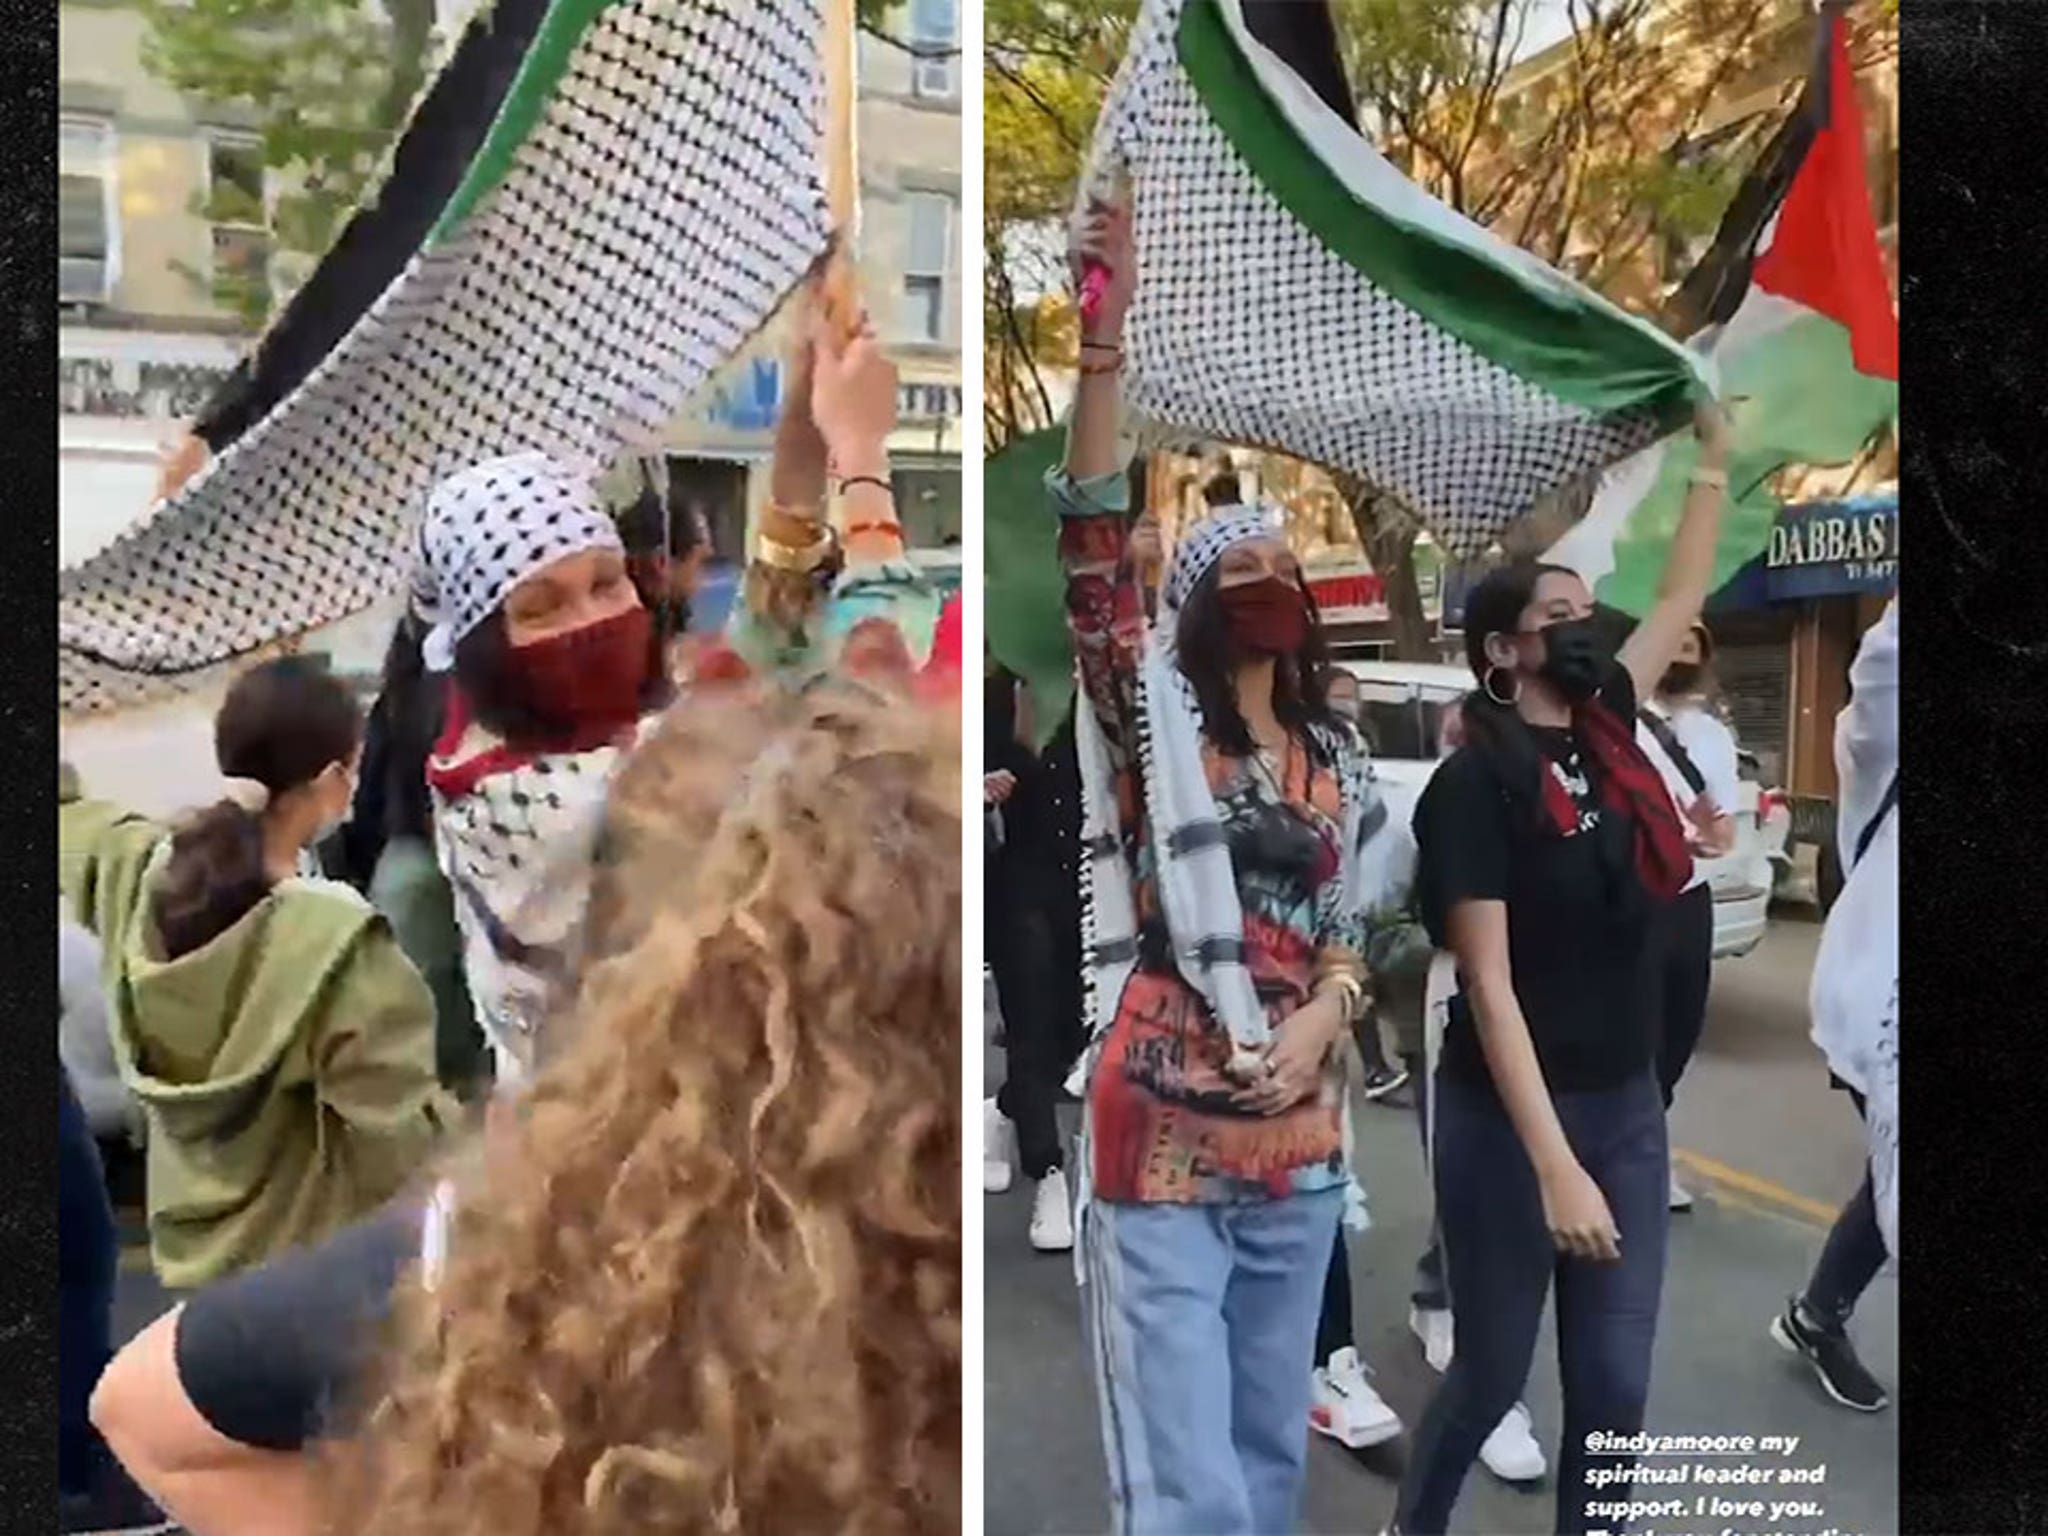 Gregory on X: Bella Hadid standing & demonstrating in #Brooklyn #NY  wearing her keffiyeh & proudly carrying aloft the Flag of her Homeland  of #Palestine in solidarity with all those under siege